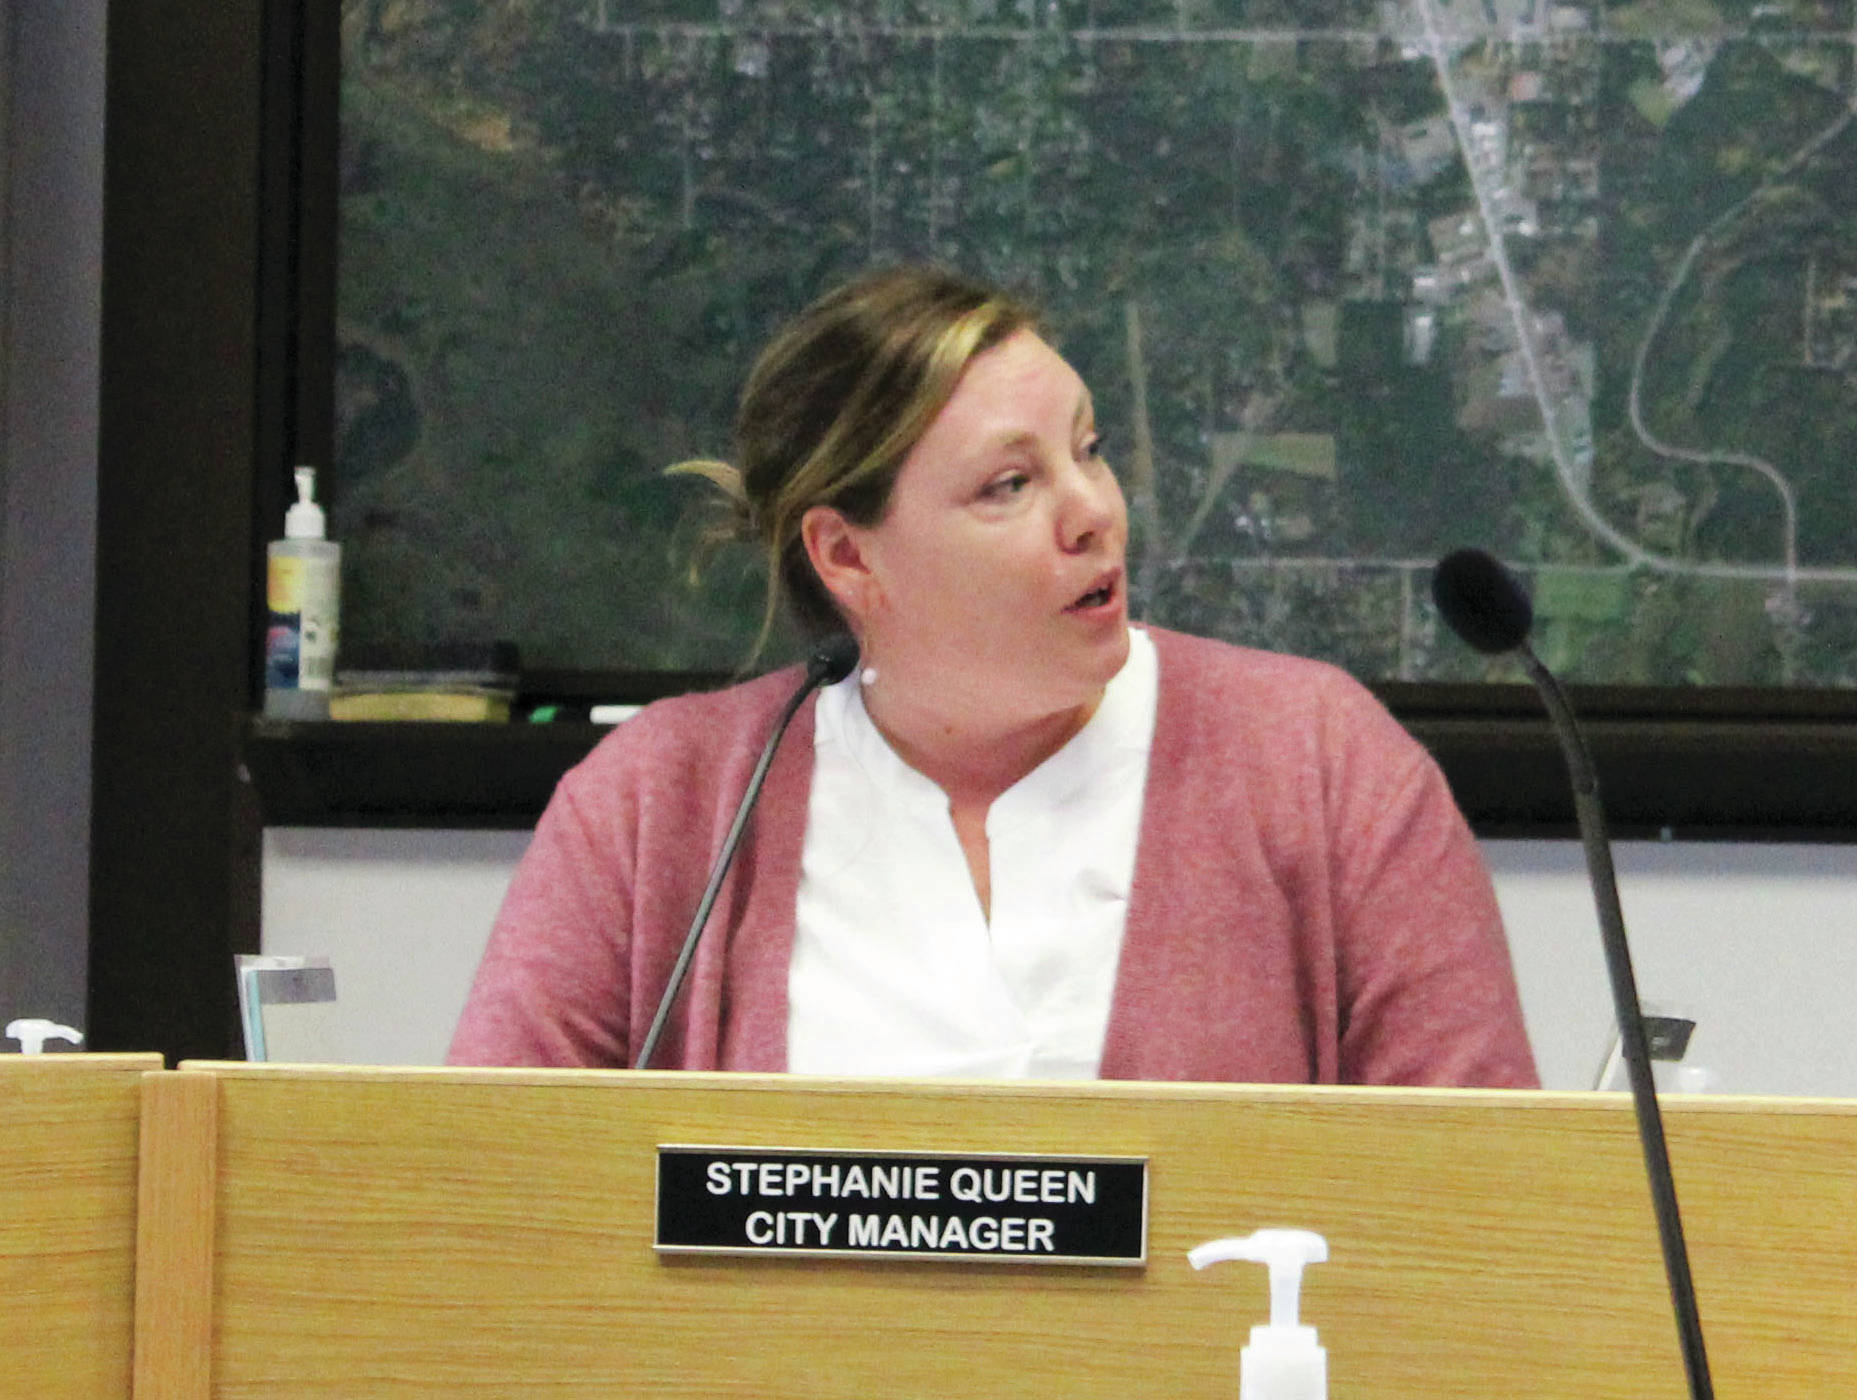 Stephanie Queen speaks during a meeting of the Soldotna City Council on Wednesday, July 28, 2021 in Soldotna, Alaska. (Ashlyn O’Hara/Peninsula Clarion)